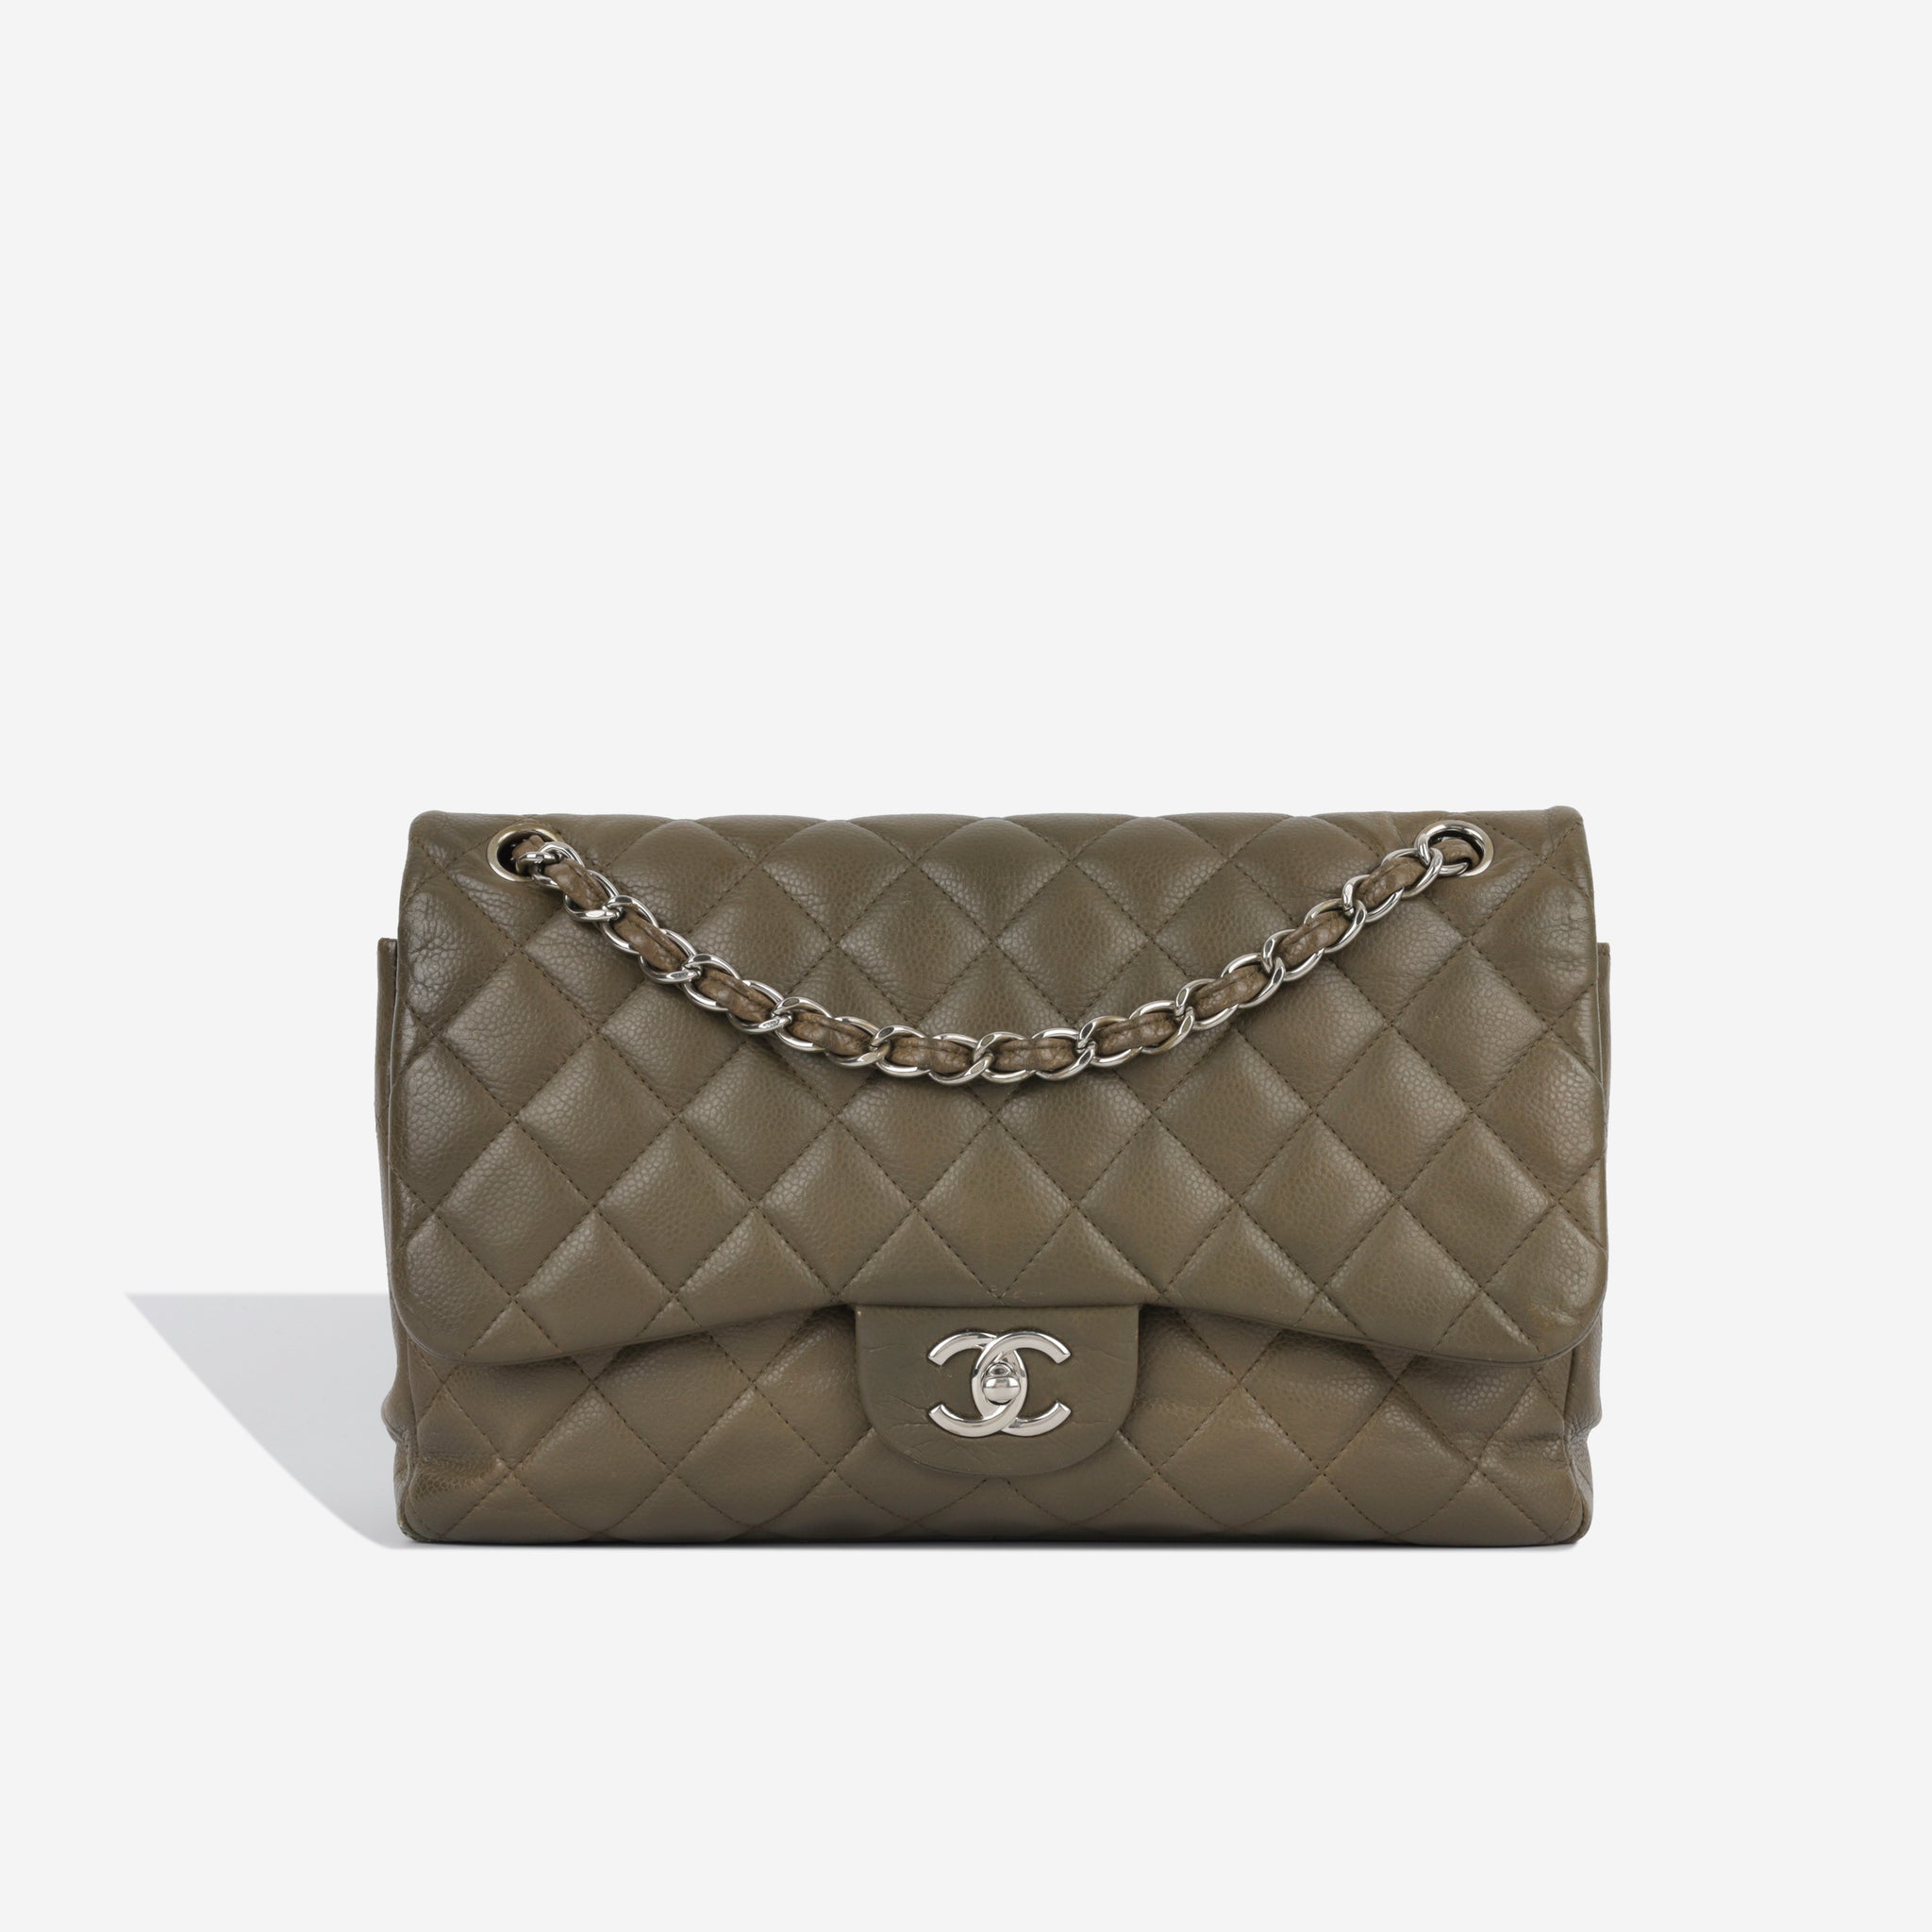 Chanel - Classic Flap Bag - Jumbo - Olive Green - SHW - Pre Loved | Bagista